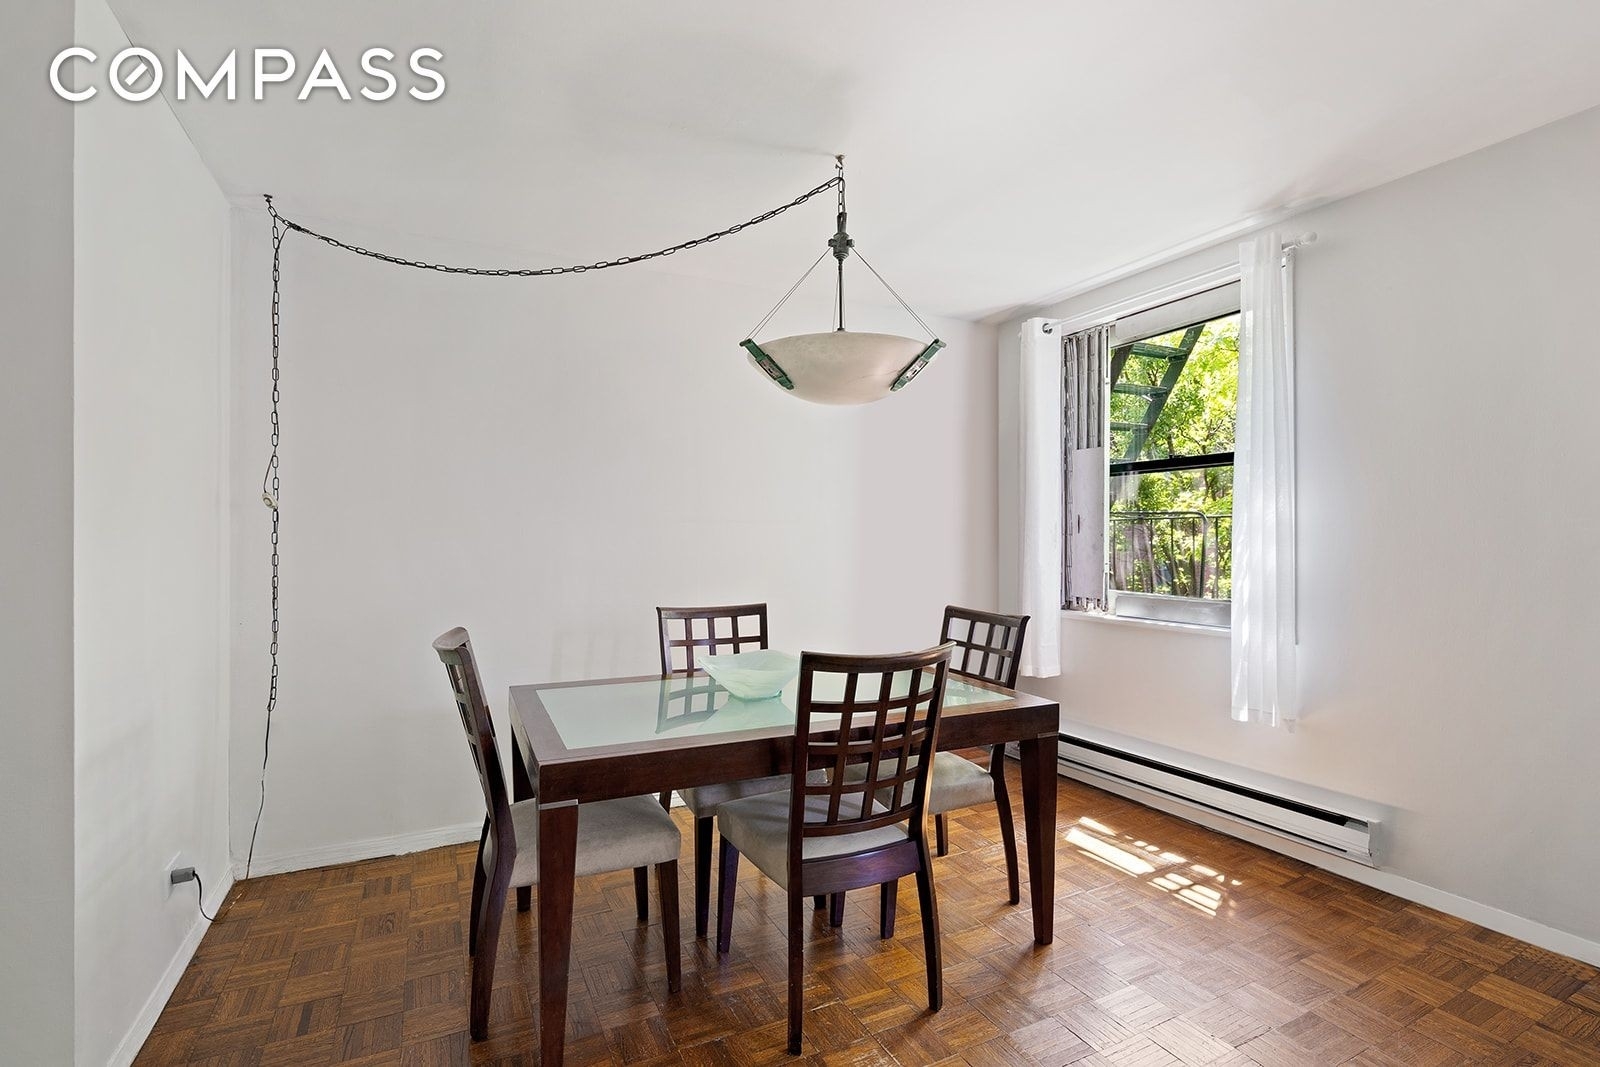 Co-op Properties for Sale at 148 BANK ST, 4B West Village, New York, New York 10014